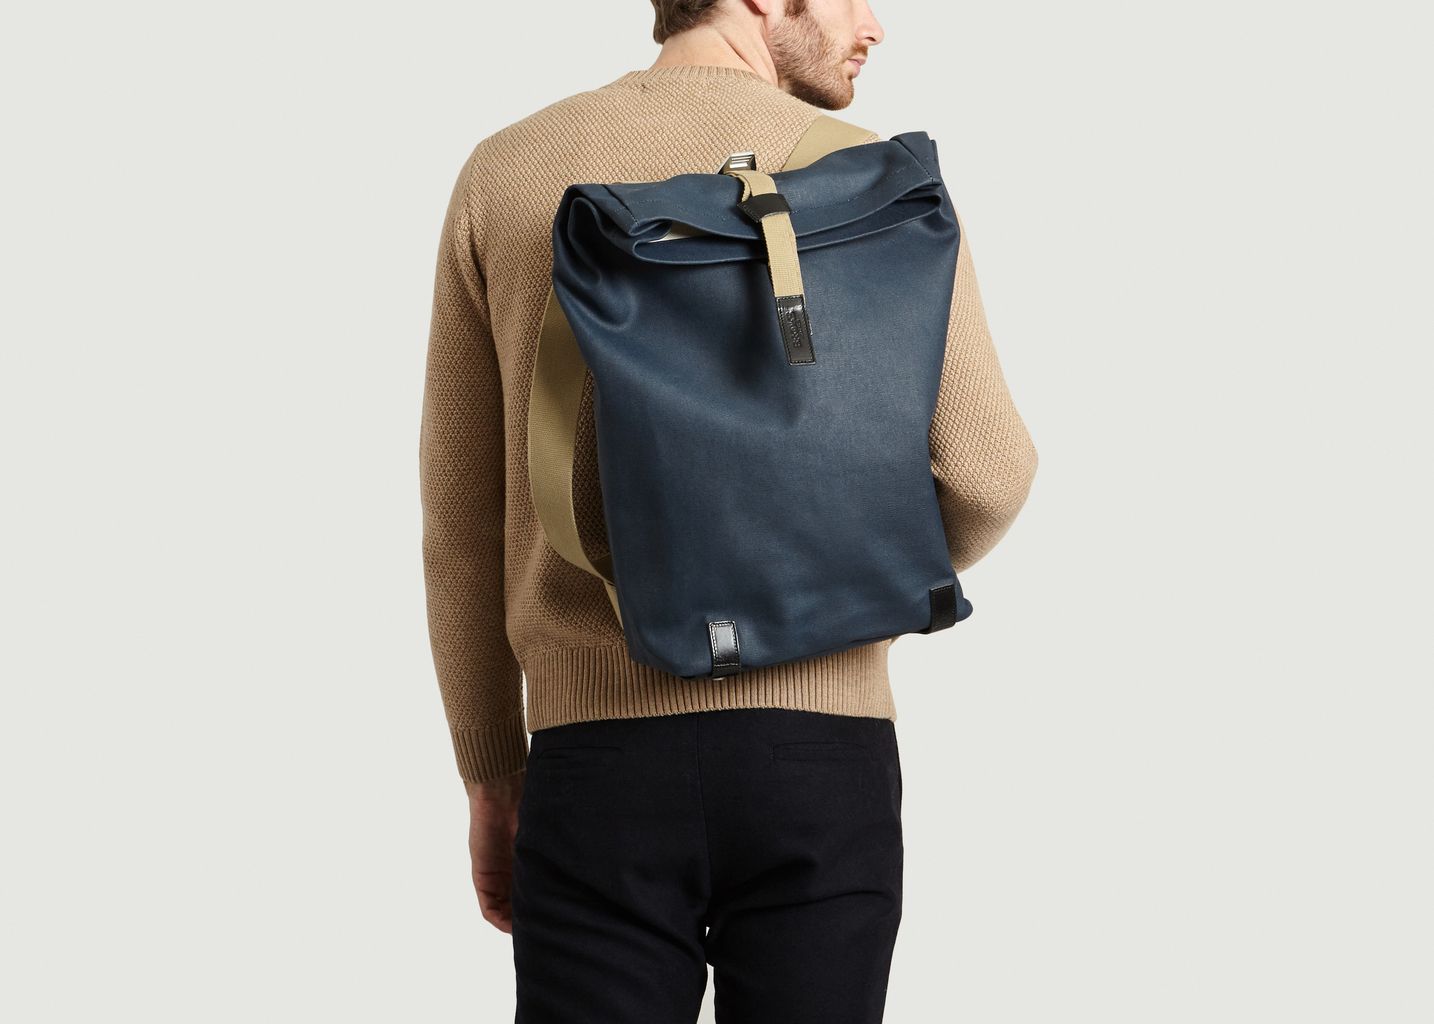 Pickwick Backpack 26L Navy Blue Brooks England | L’Exception